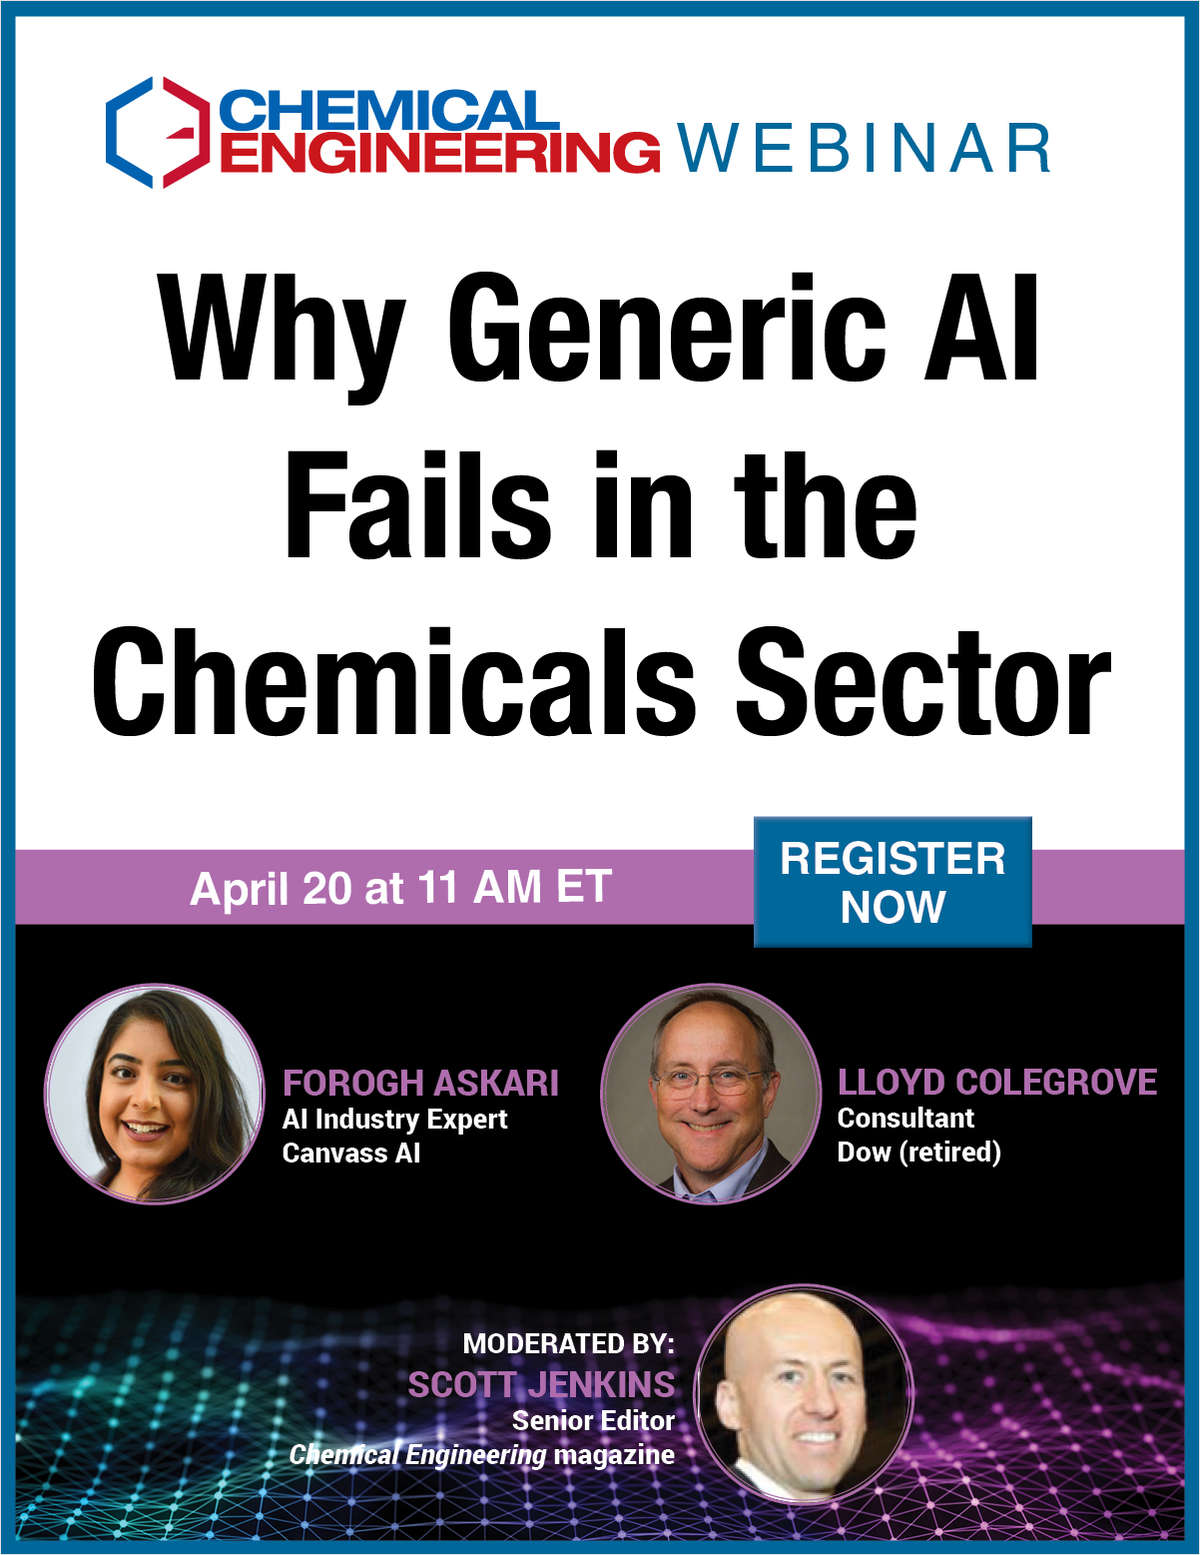 Why Generic AI Fails in the Chemicals Sector